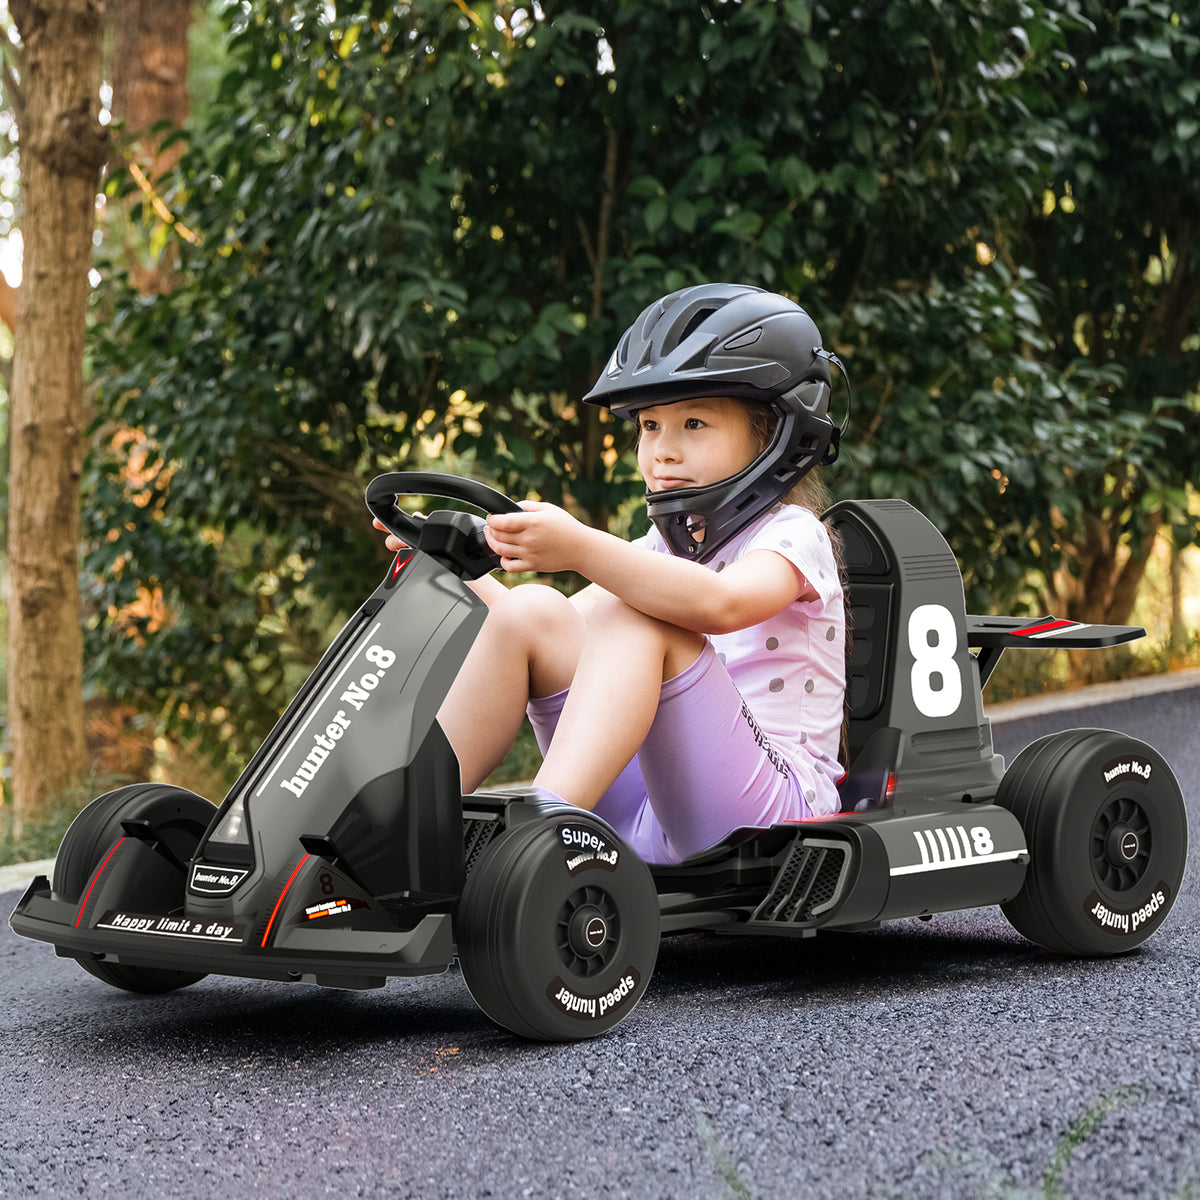 XJD 12V Electric Drifting Go Kart for Kids Battery Powered Driving Car Toy with Remote Control/Cool Lights/Bluetooth Music, Black